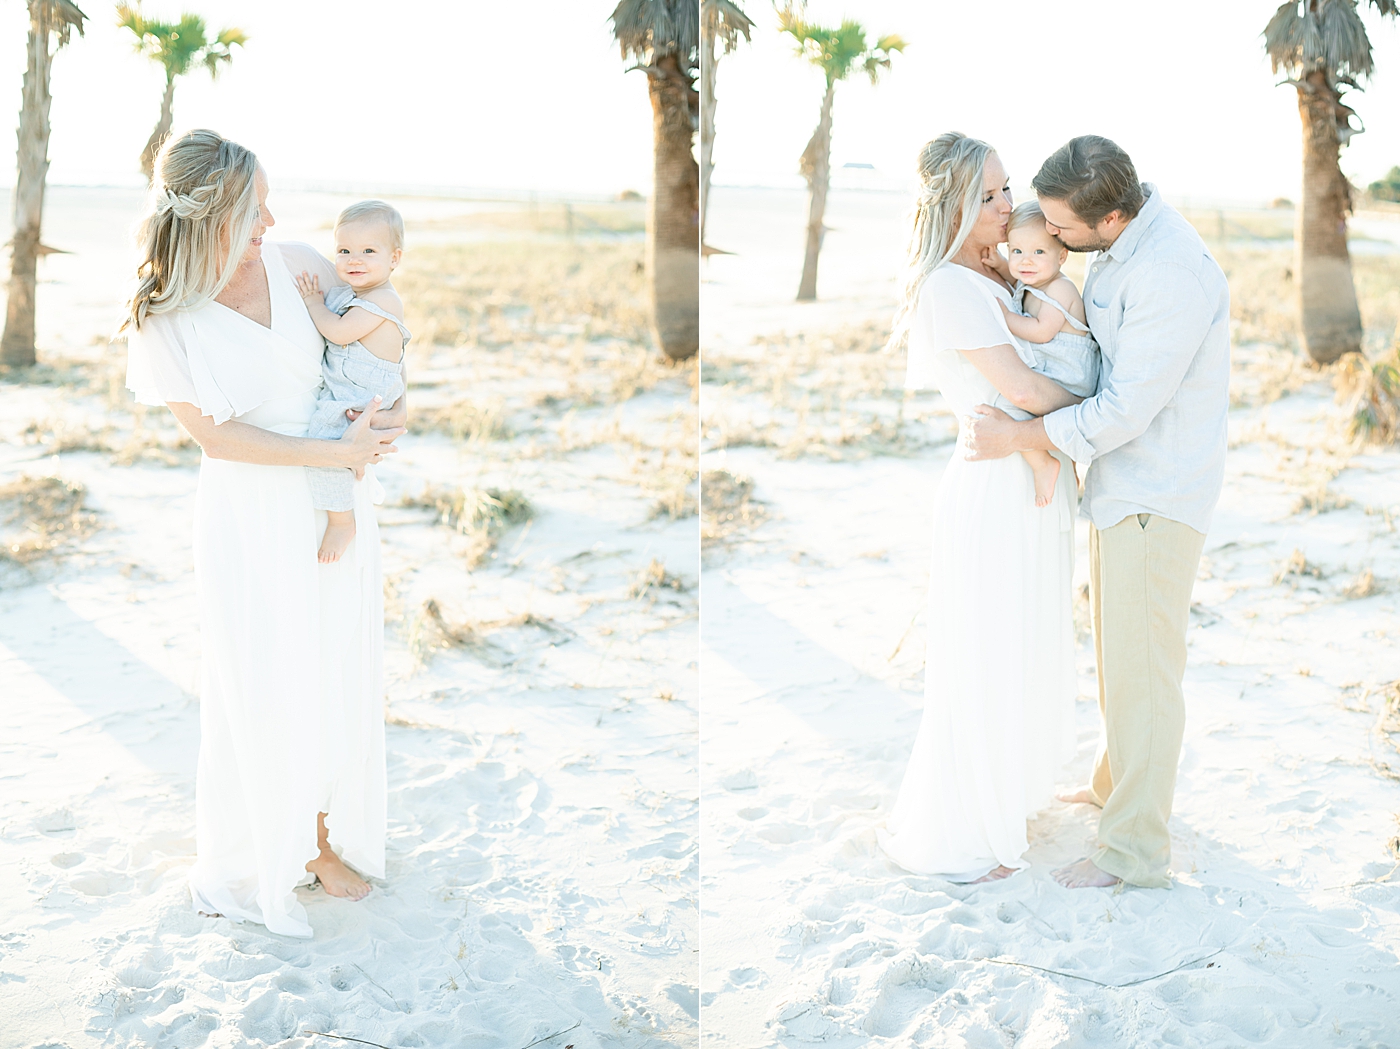 Mom and Dad loving on their son. Photo by Little Sunshine Photography.